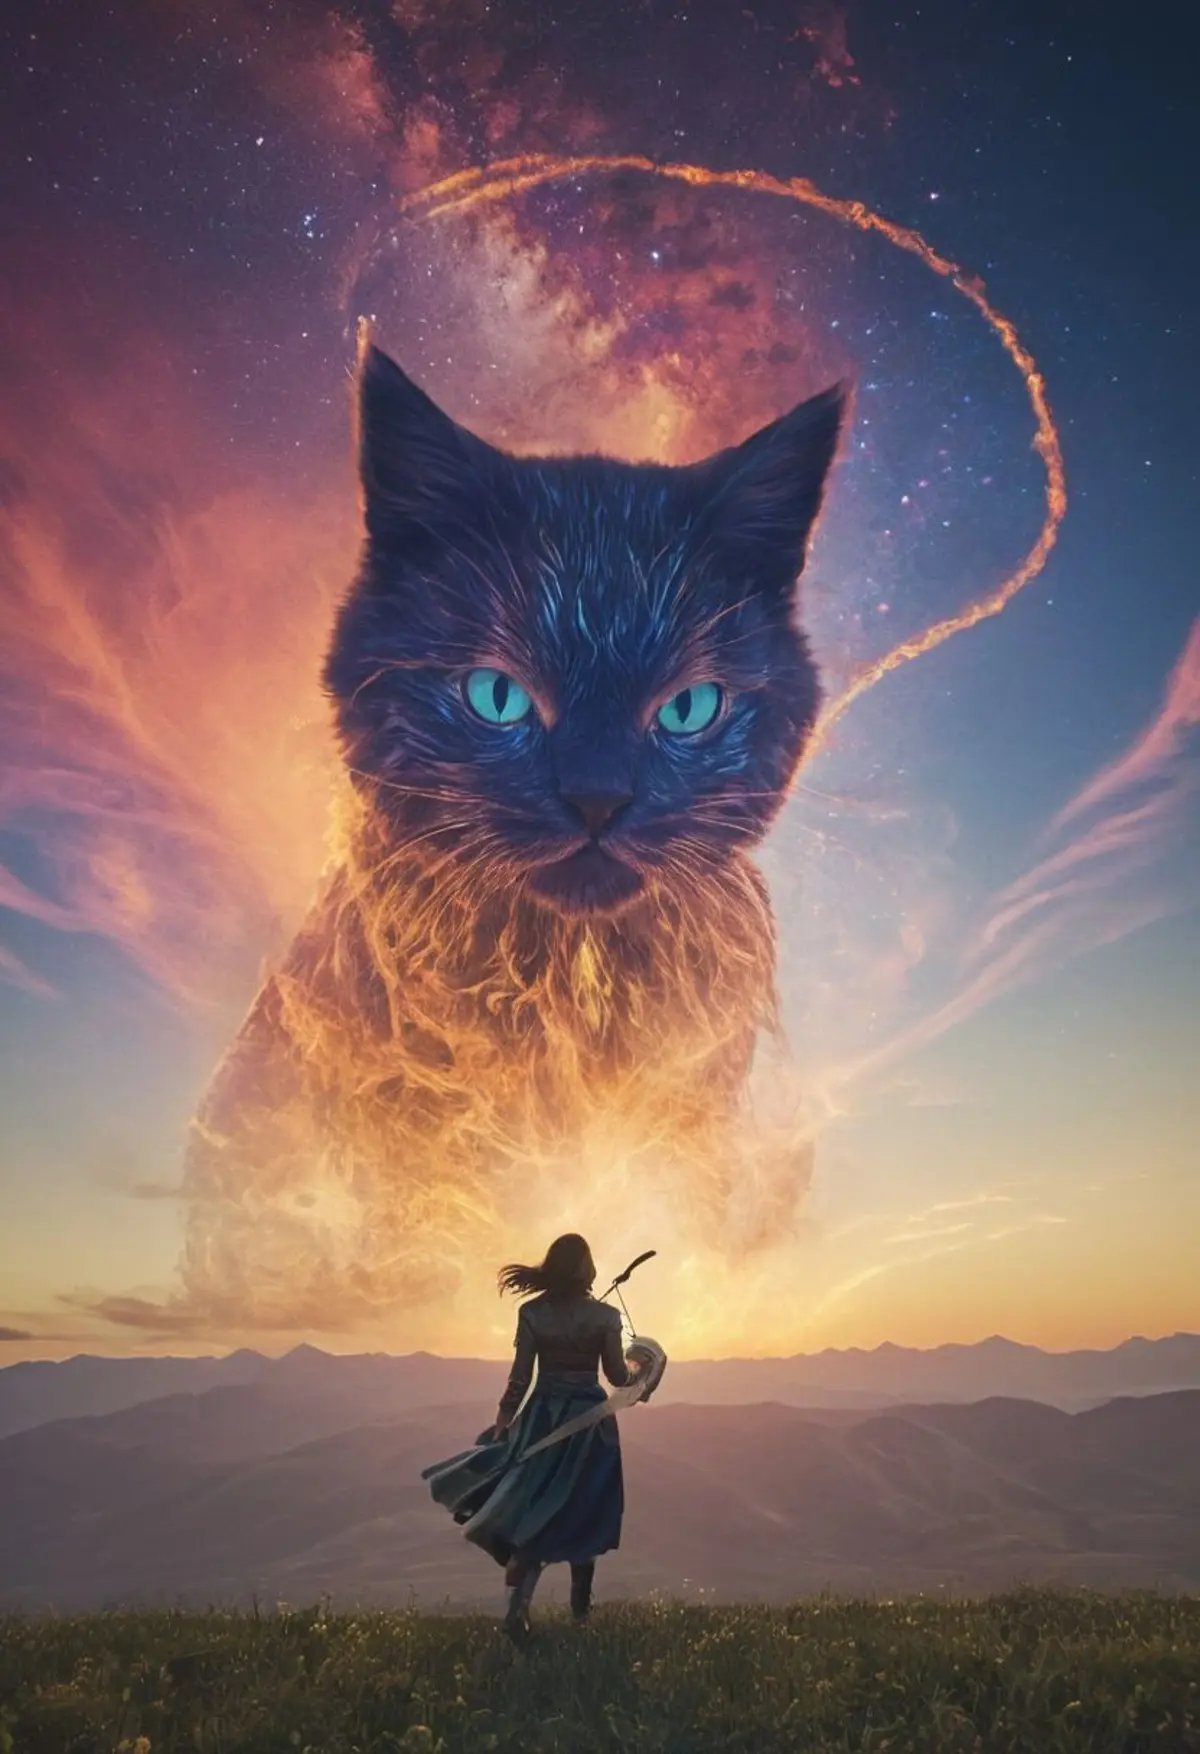 A person standing in a grassy field at twilight, with a colossal, nebular cat that blends into a starry sky above them. The cat's body is a fiery orange, while its head is a contrasting cool blue.